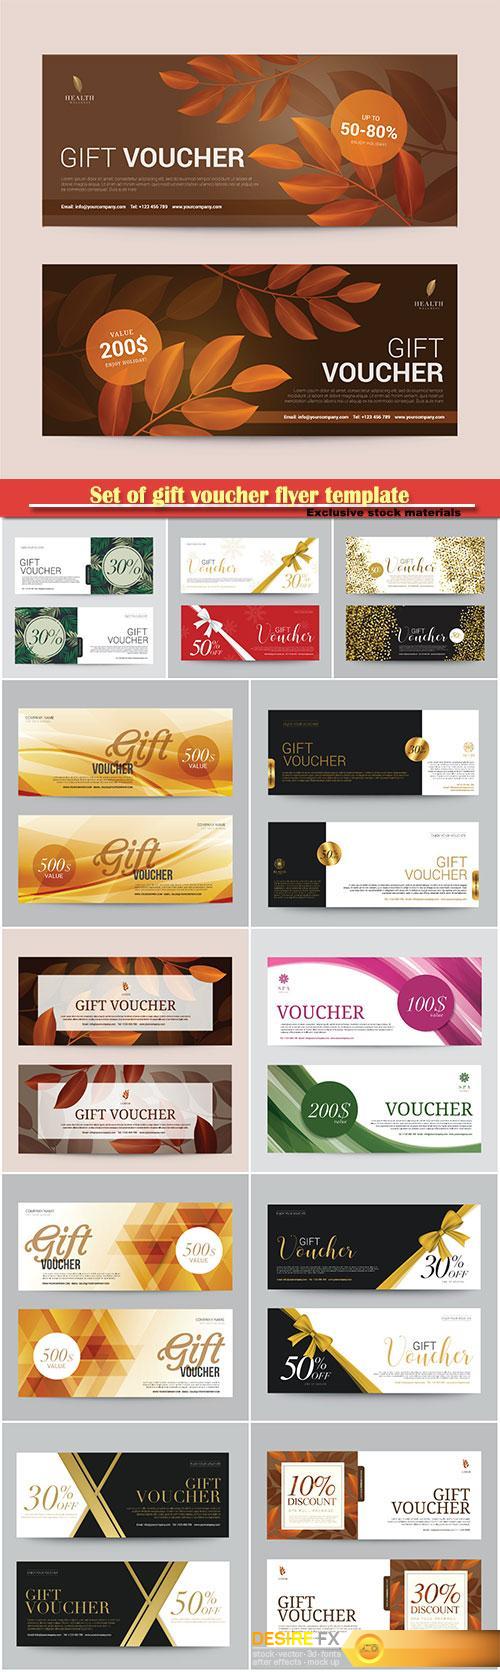 Set of gift voucher flyer template, abstract background vector illustration